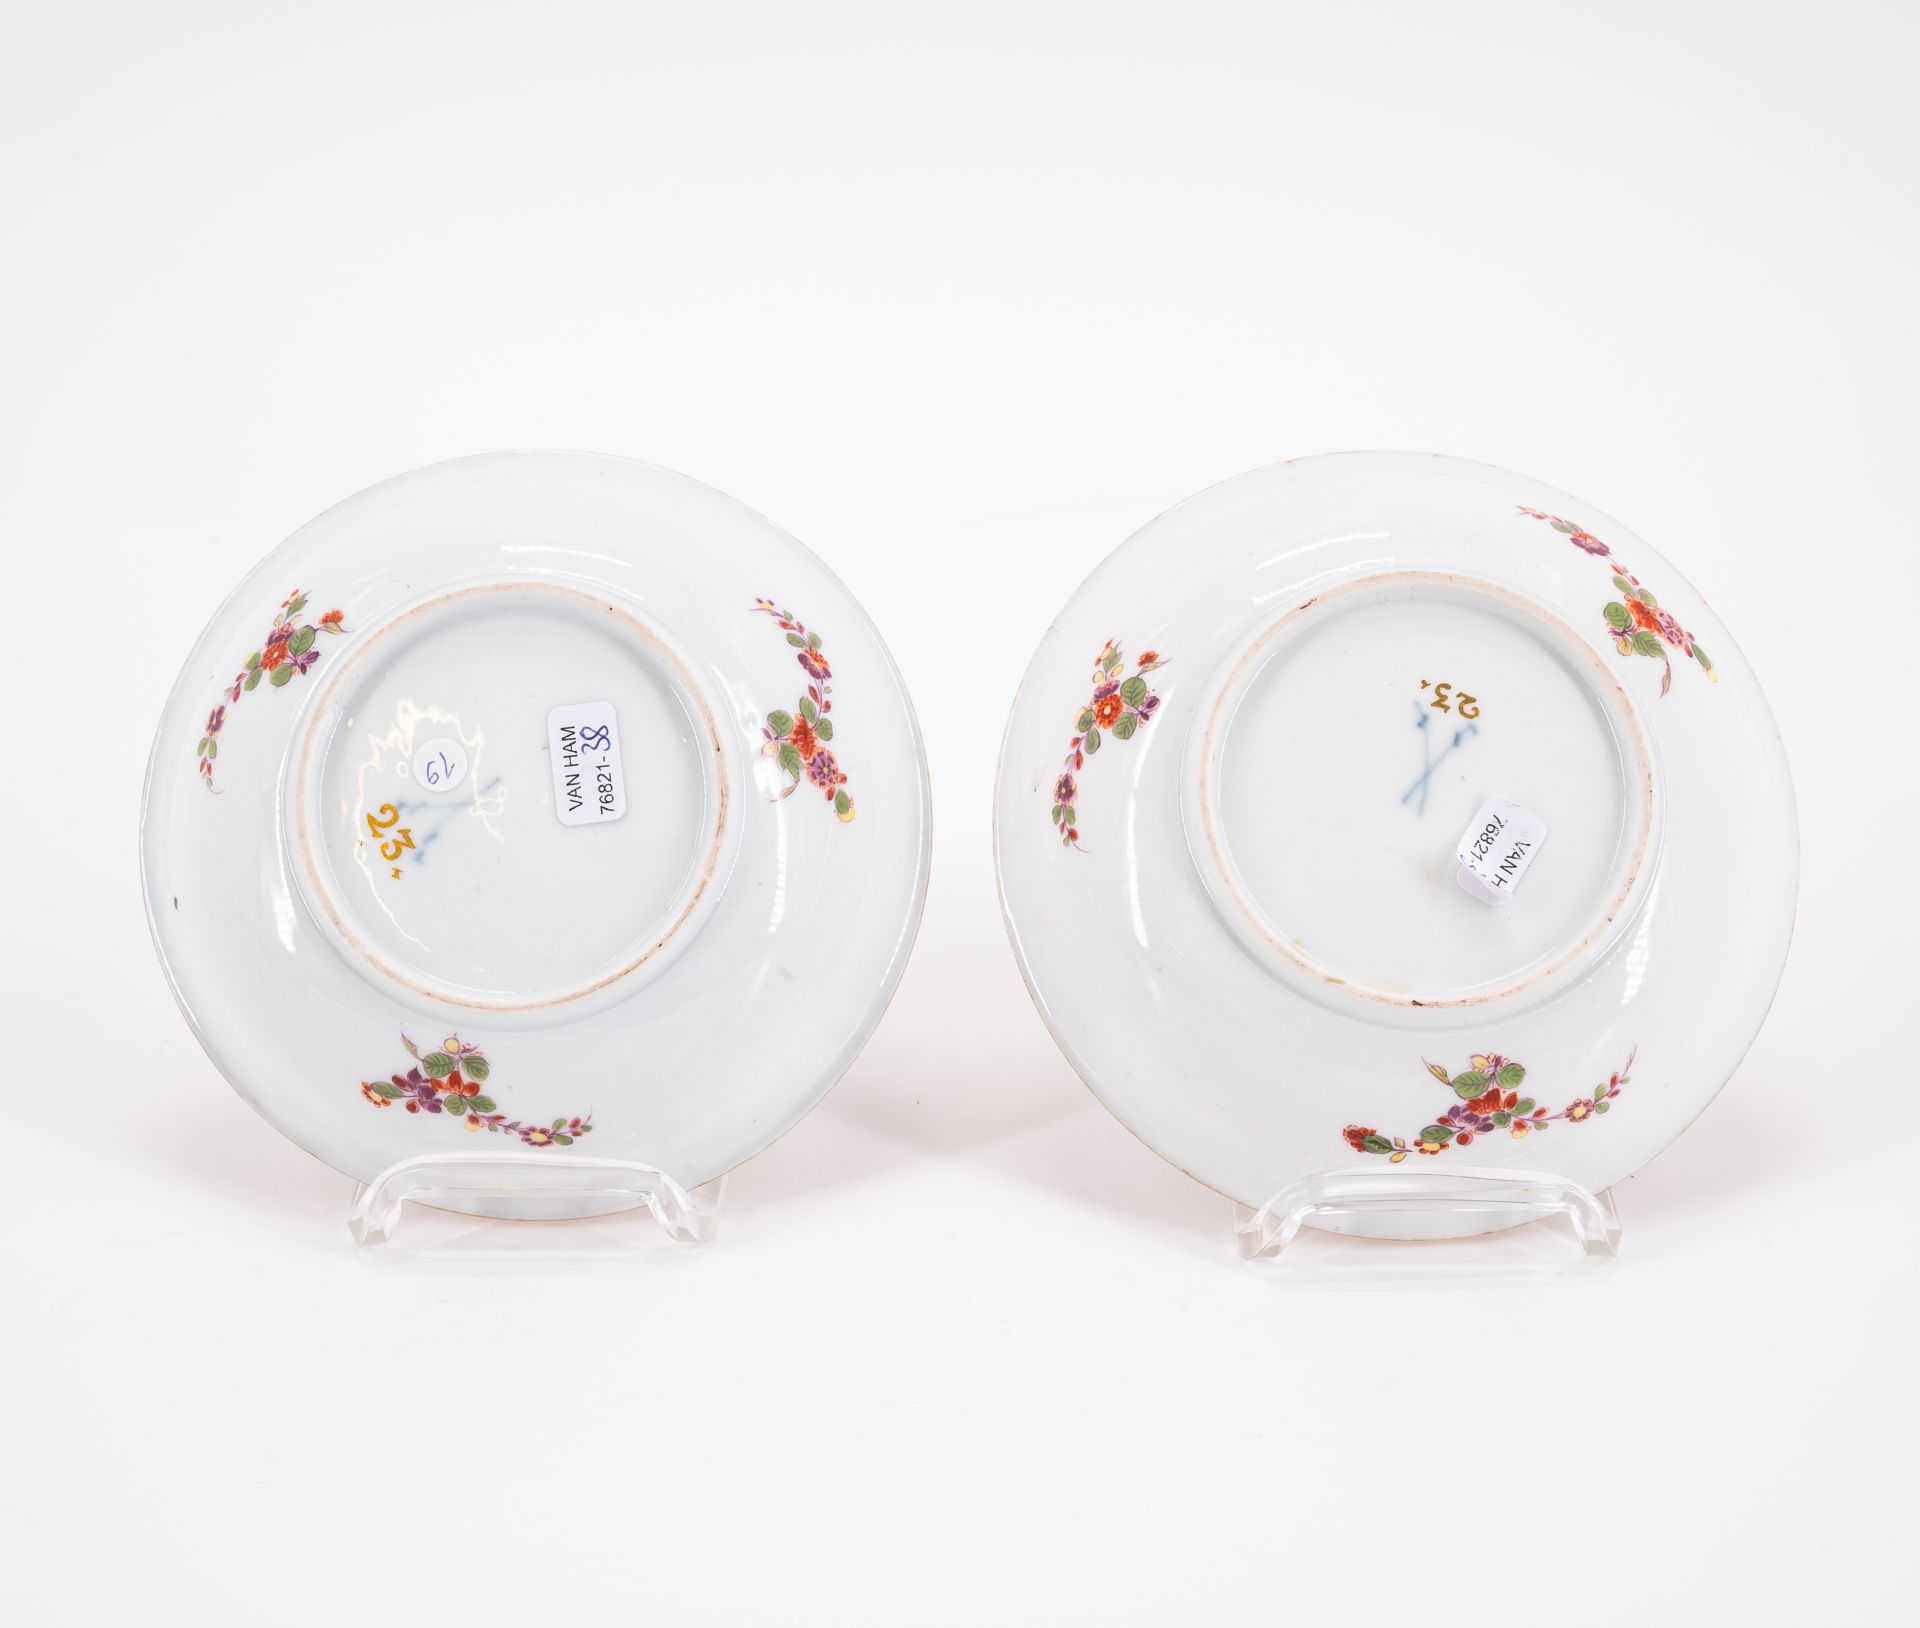 Meissen: PAIR OF PORCELAIN TEA BOWLS AND SAUCERS WITH MERCHANT NAVY SCENES - Image 8 of 8